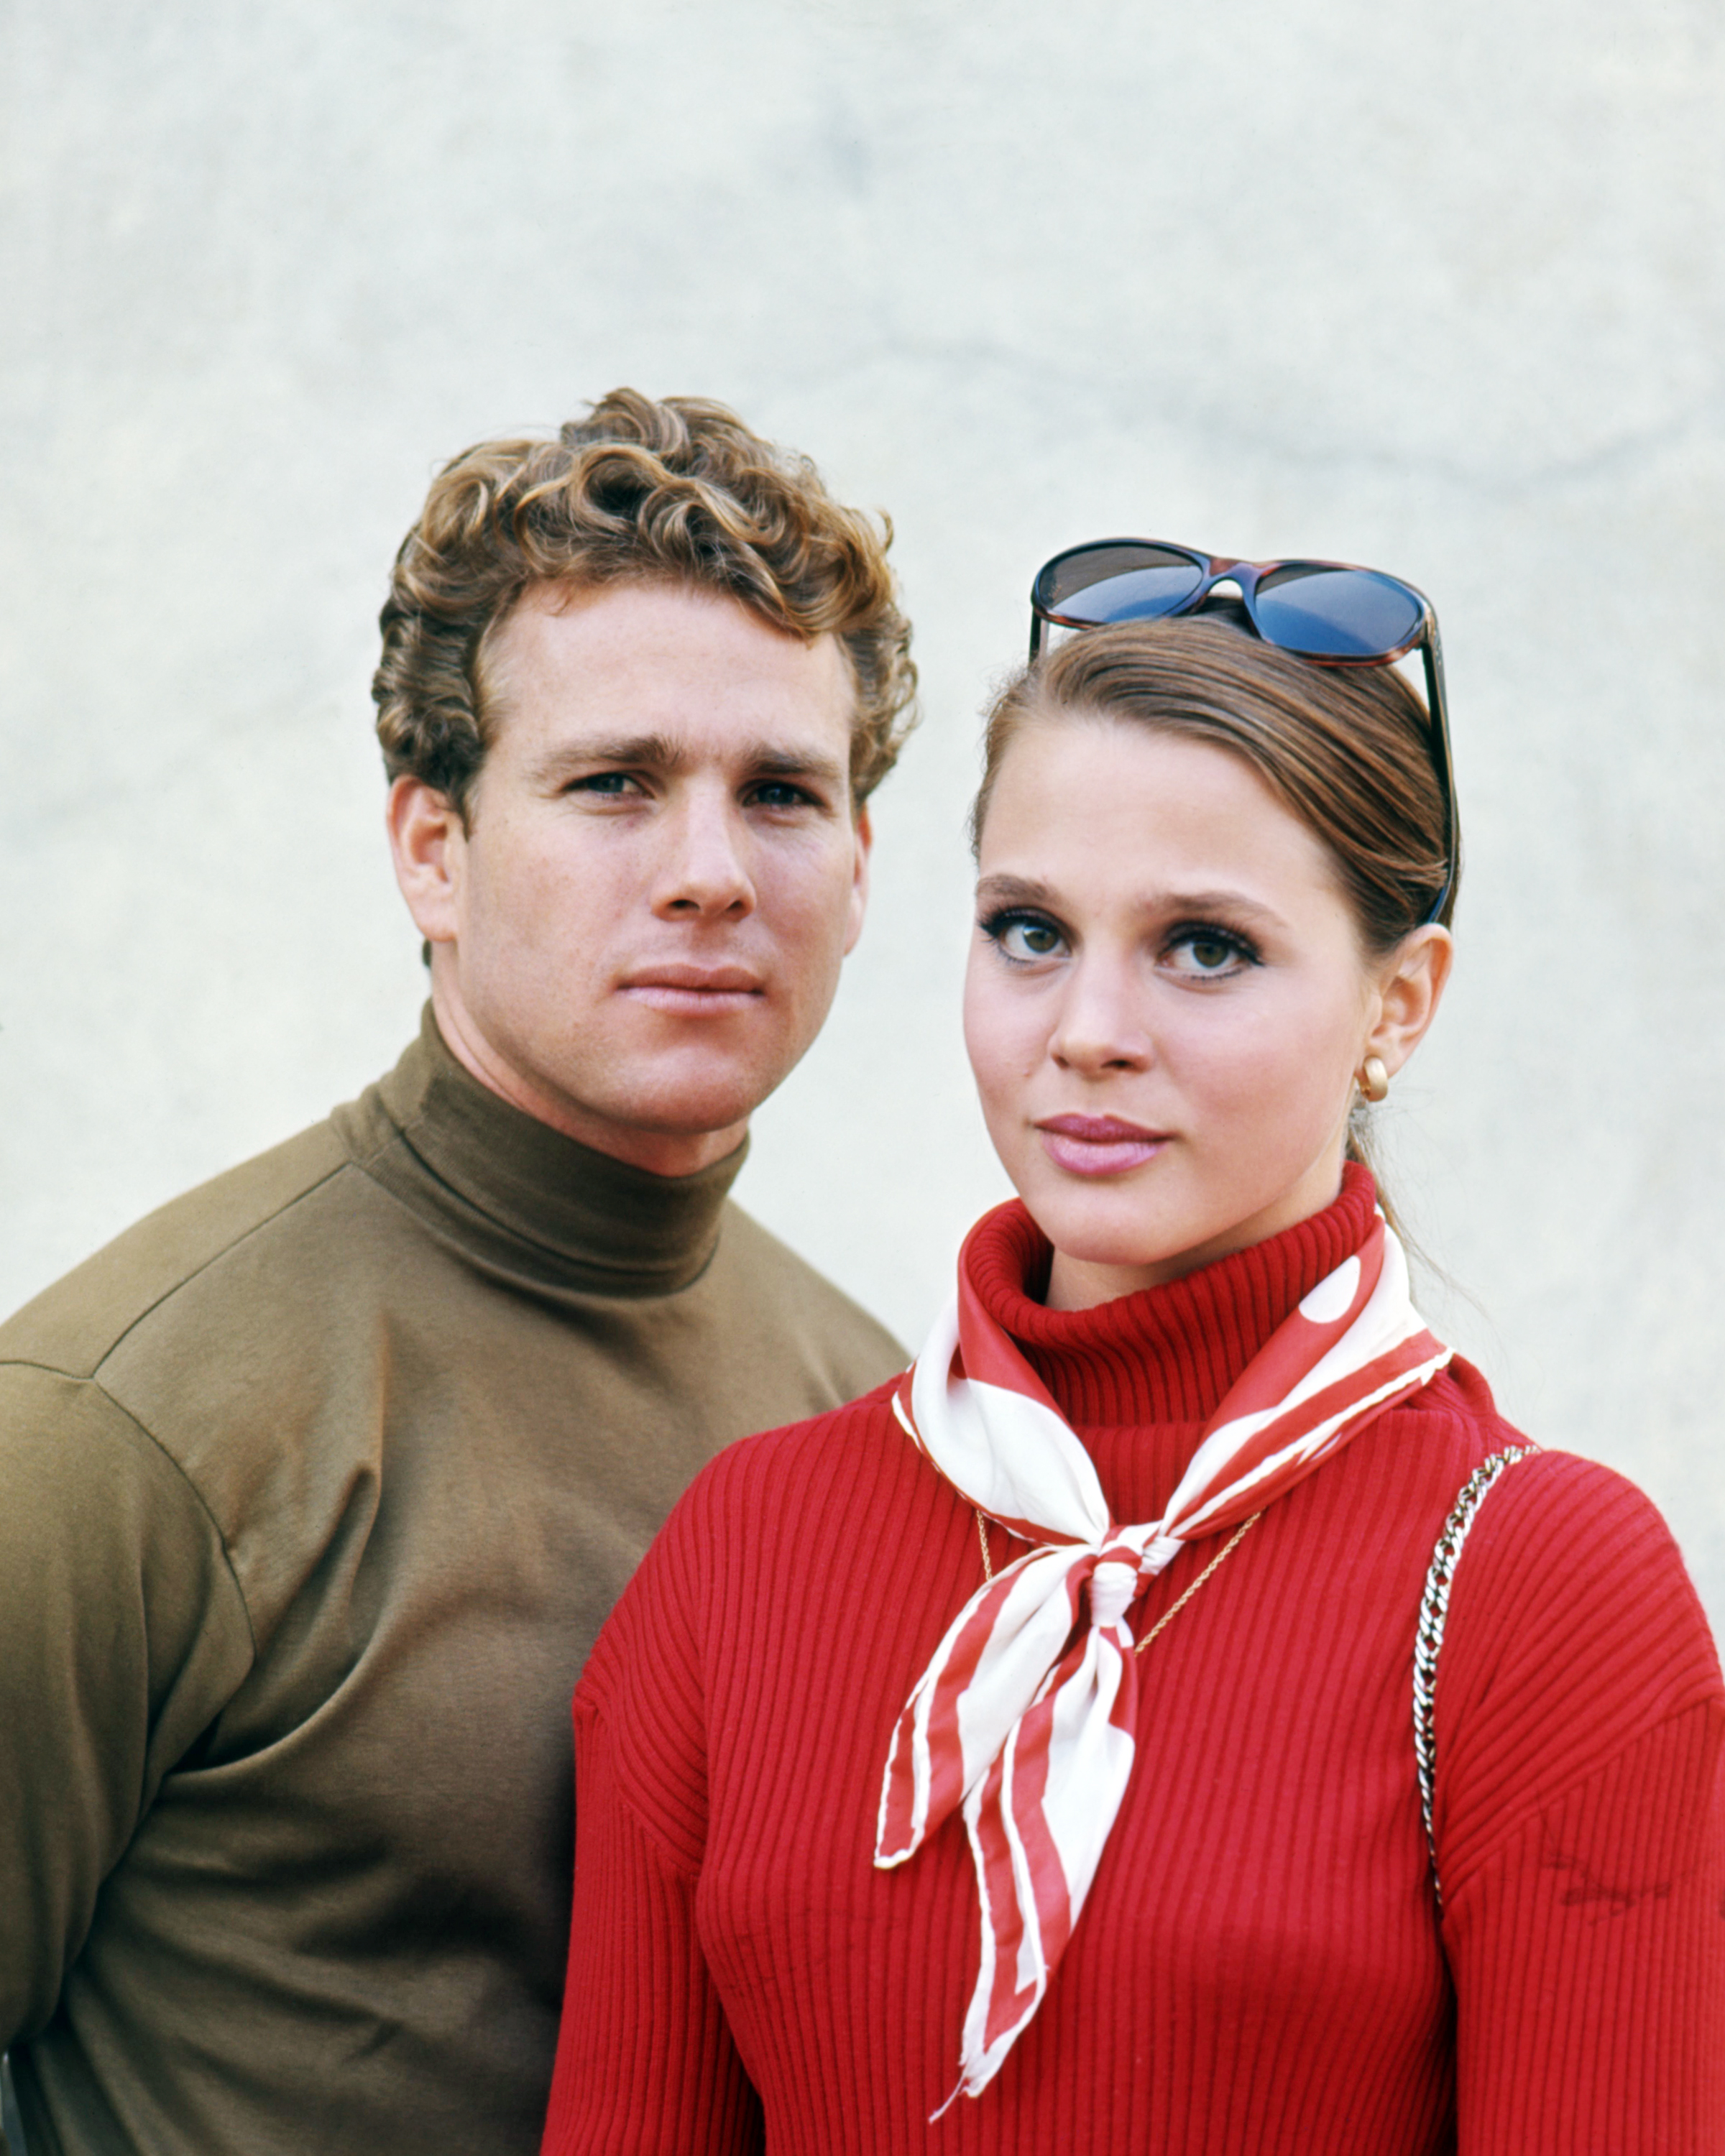 Ryan O'Neal as Rodney Harrington and Leigh Taylor-Young as Rachel Welles in "Peyton Place," circa 1966 | Source: Getty Images